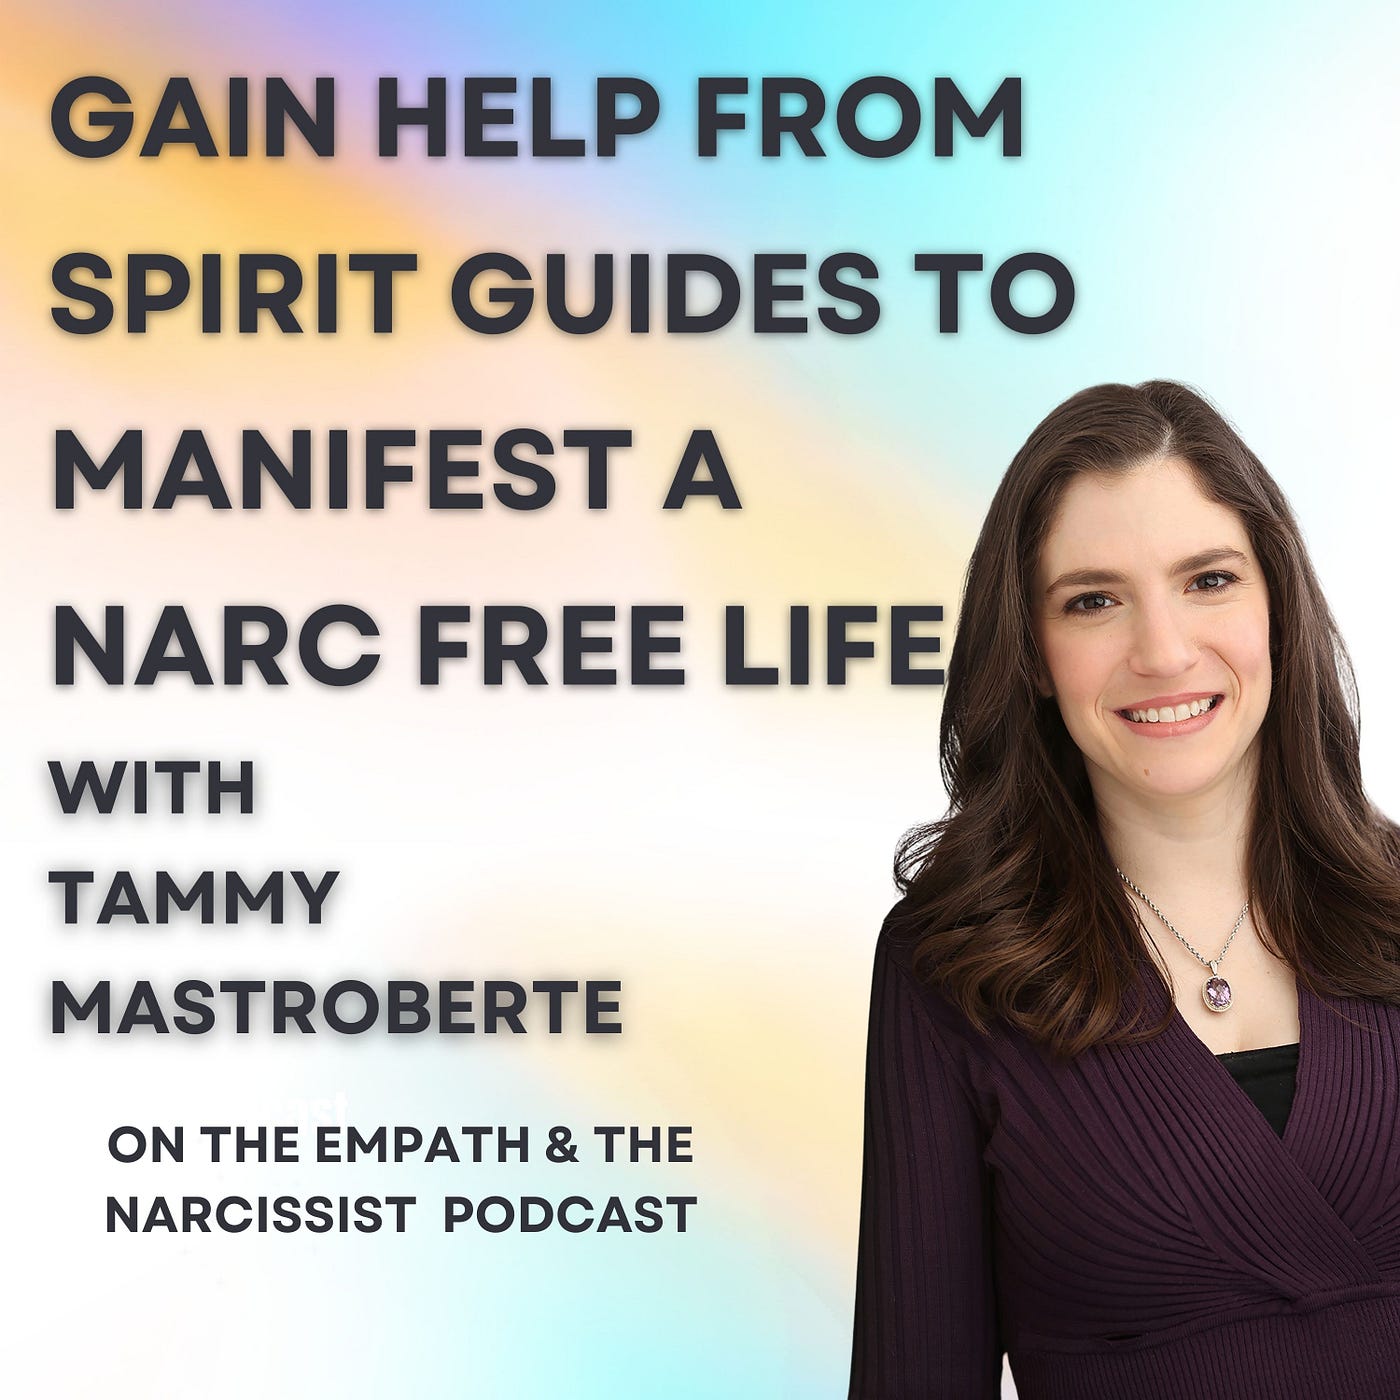 rainbow gradient with photo of Tammy Mastroberte and text "gain help from spirit guides to manifest a narc free life. with Tammy Mastroberte"